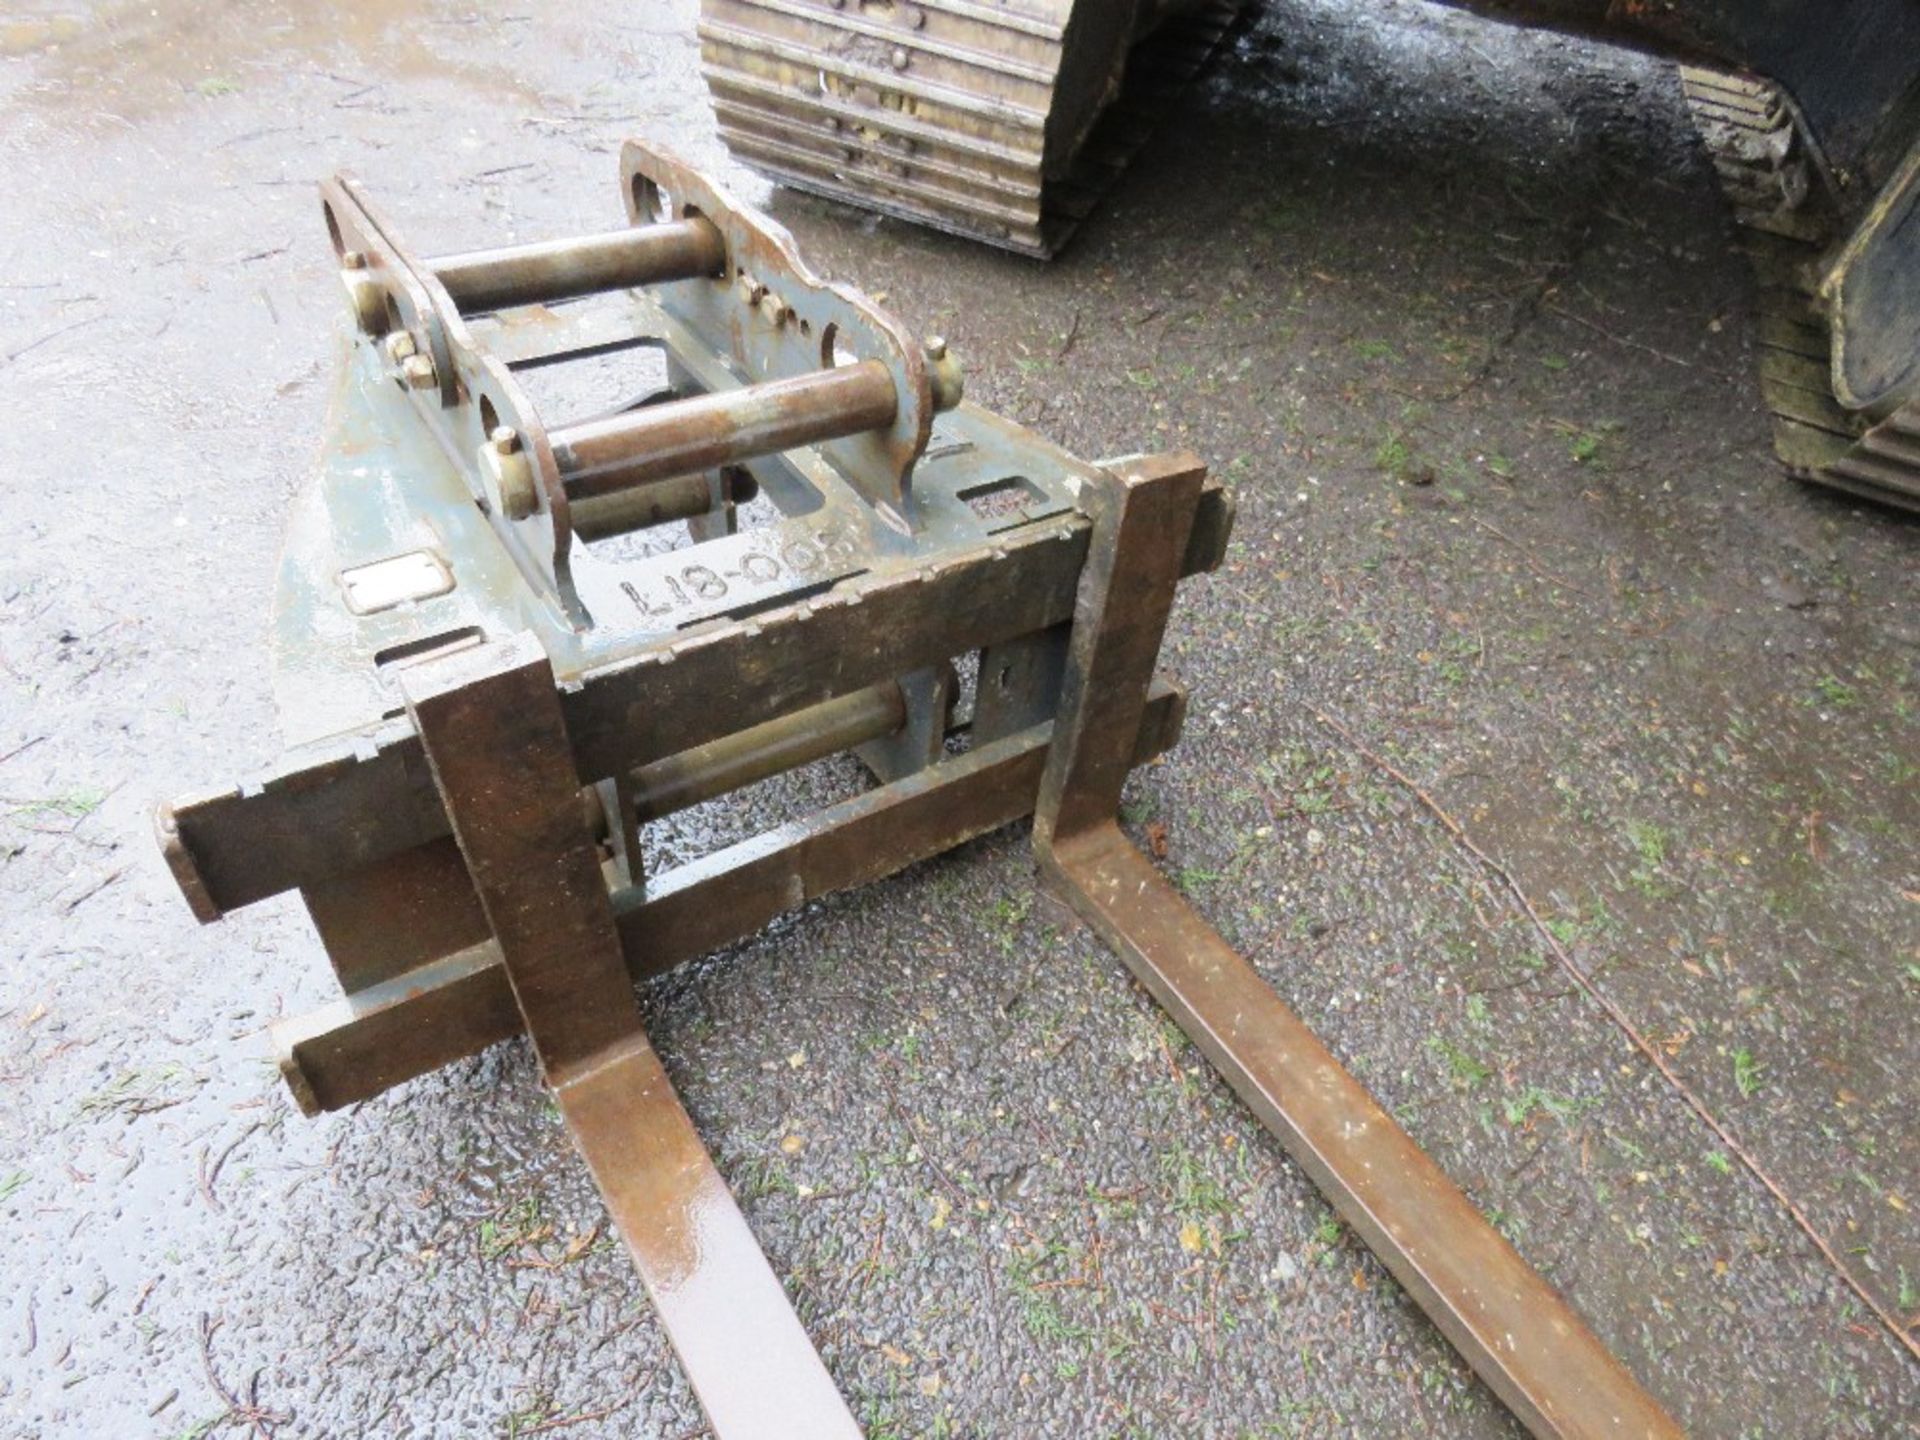 SET OF DROMORE PALLET FORKS FOR 13 TONNE EXCAVATOR, 65MM PINS, DIRECT EX LOCAL COMPANY, UNTESTED - Image 2 of 5